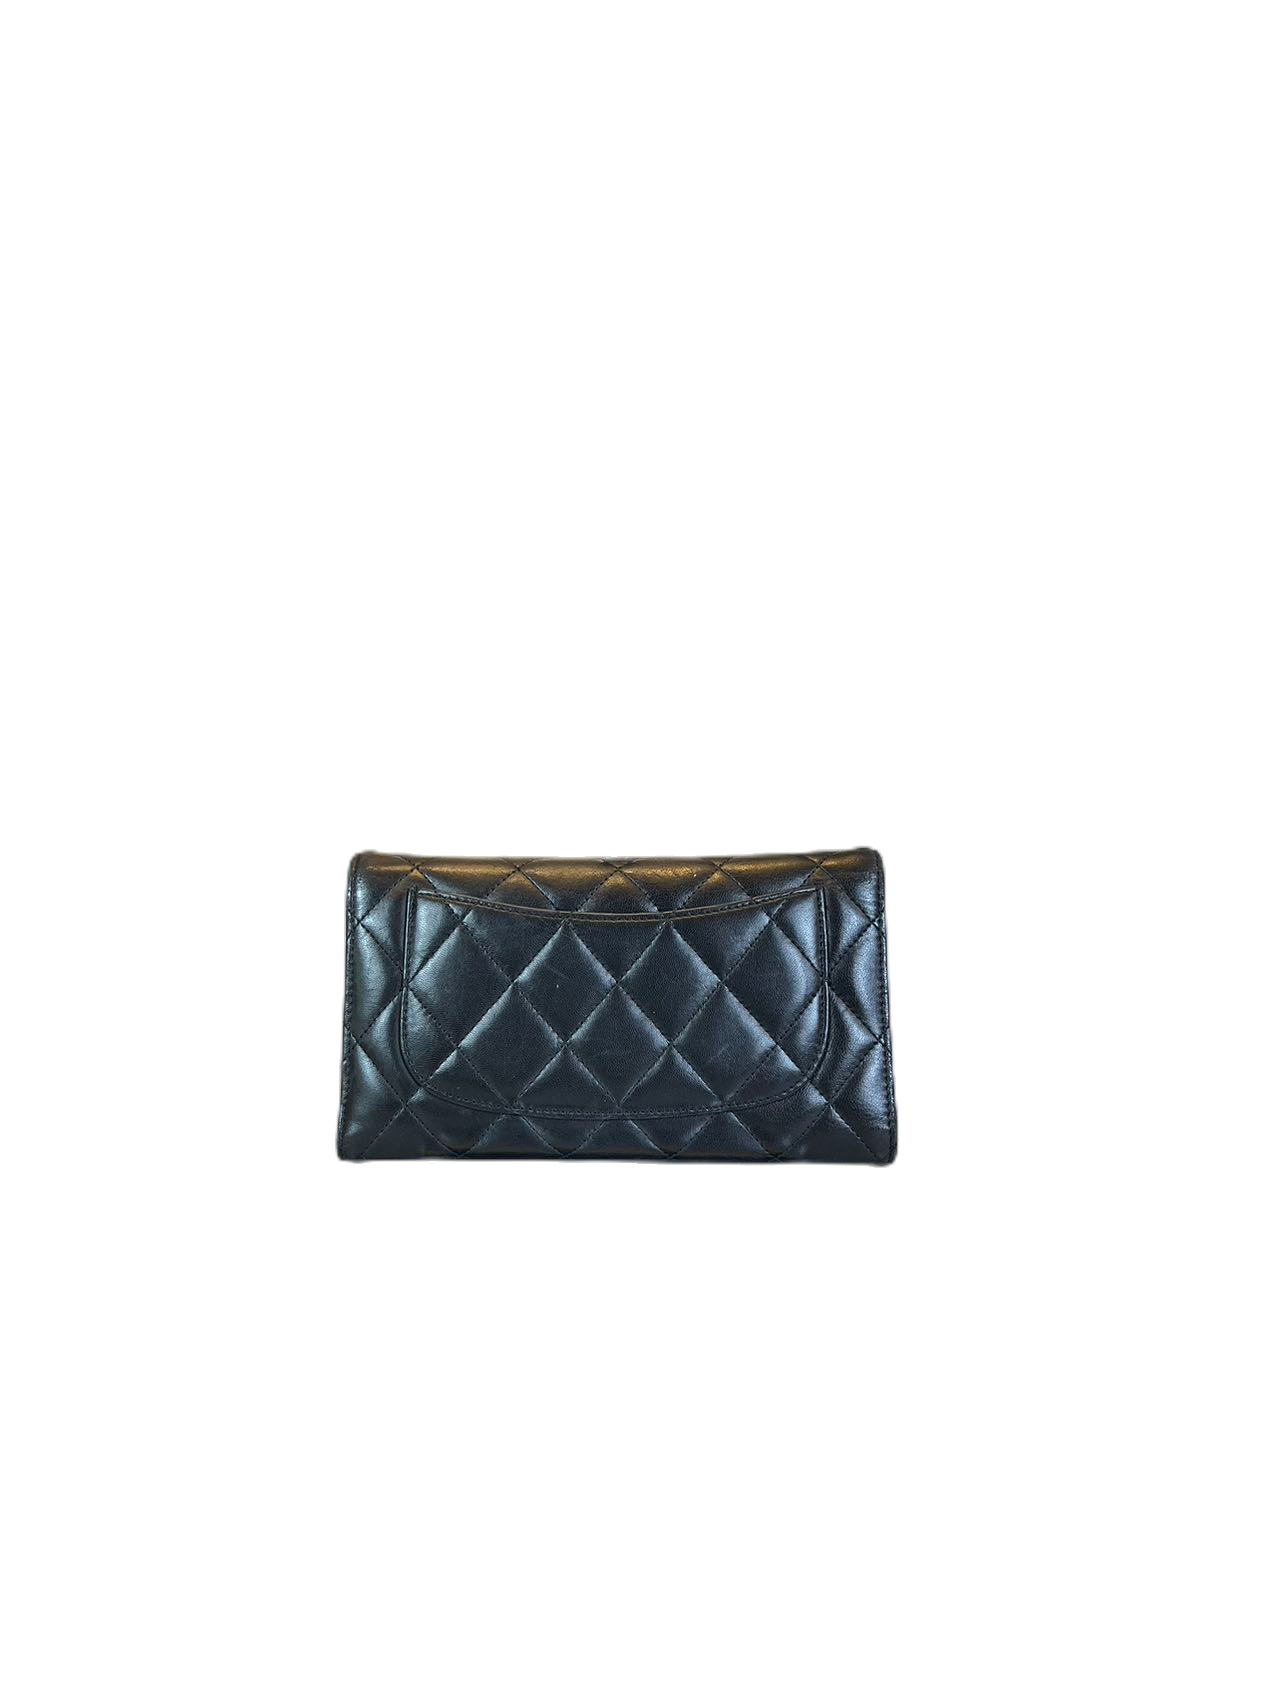 Preloved Chanel Black Leather Lambskin Quilted Wallet Purse